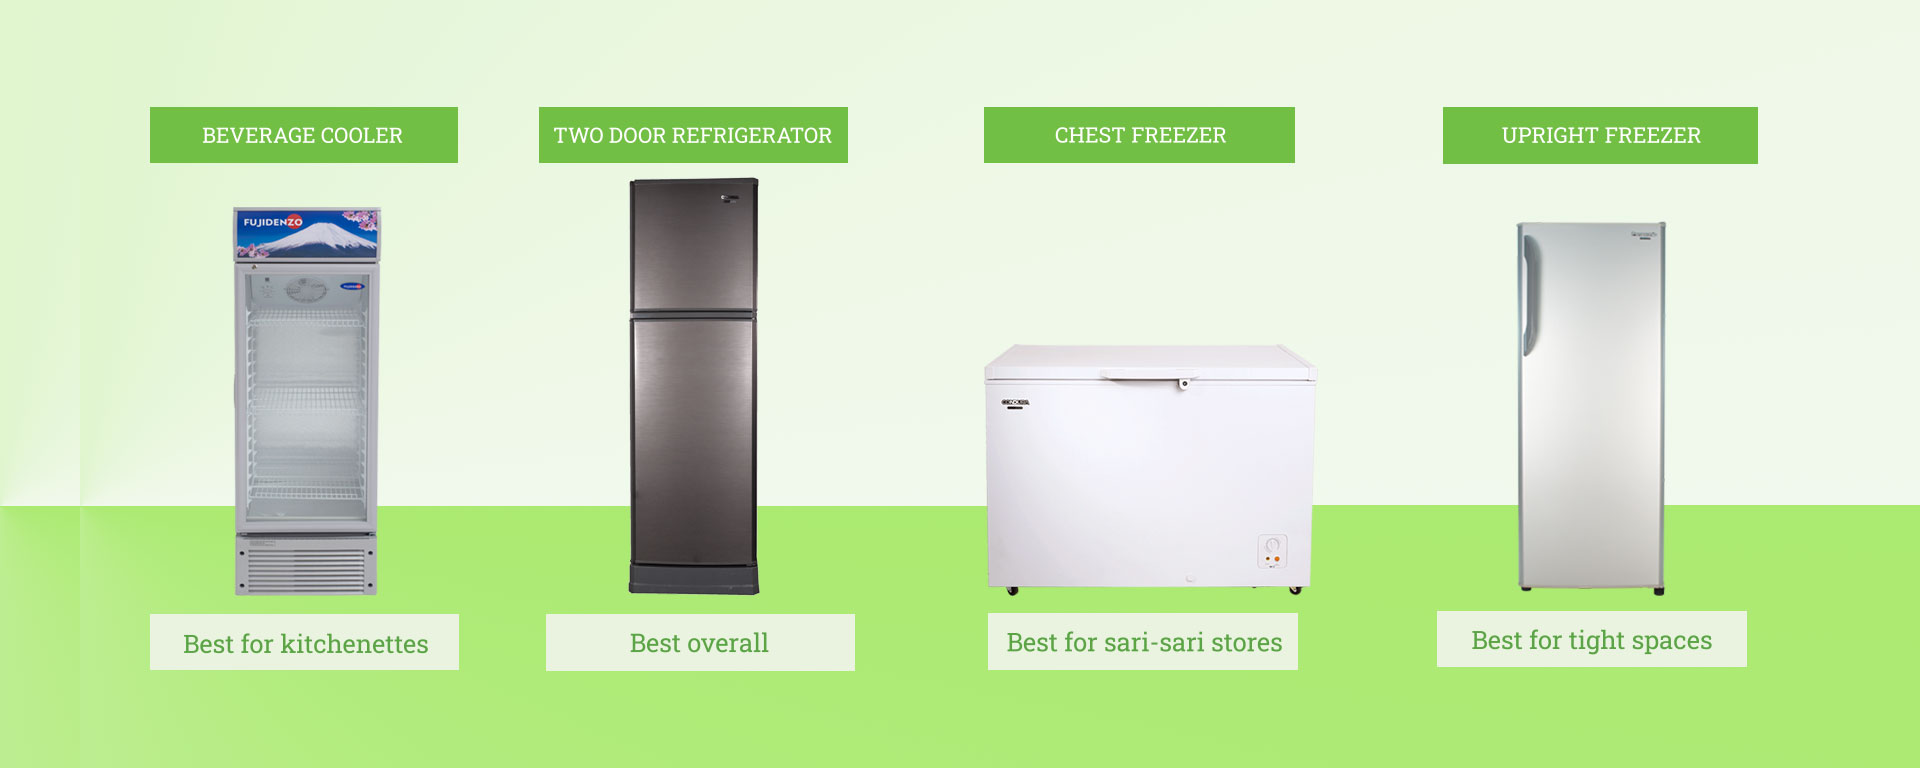 best refrigerators for home business in the philippines